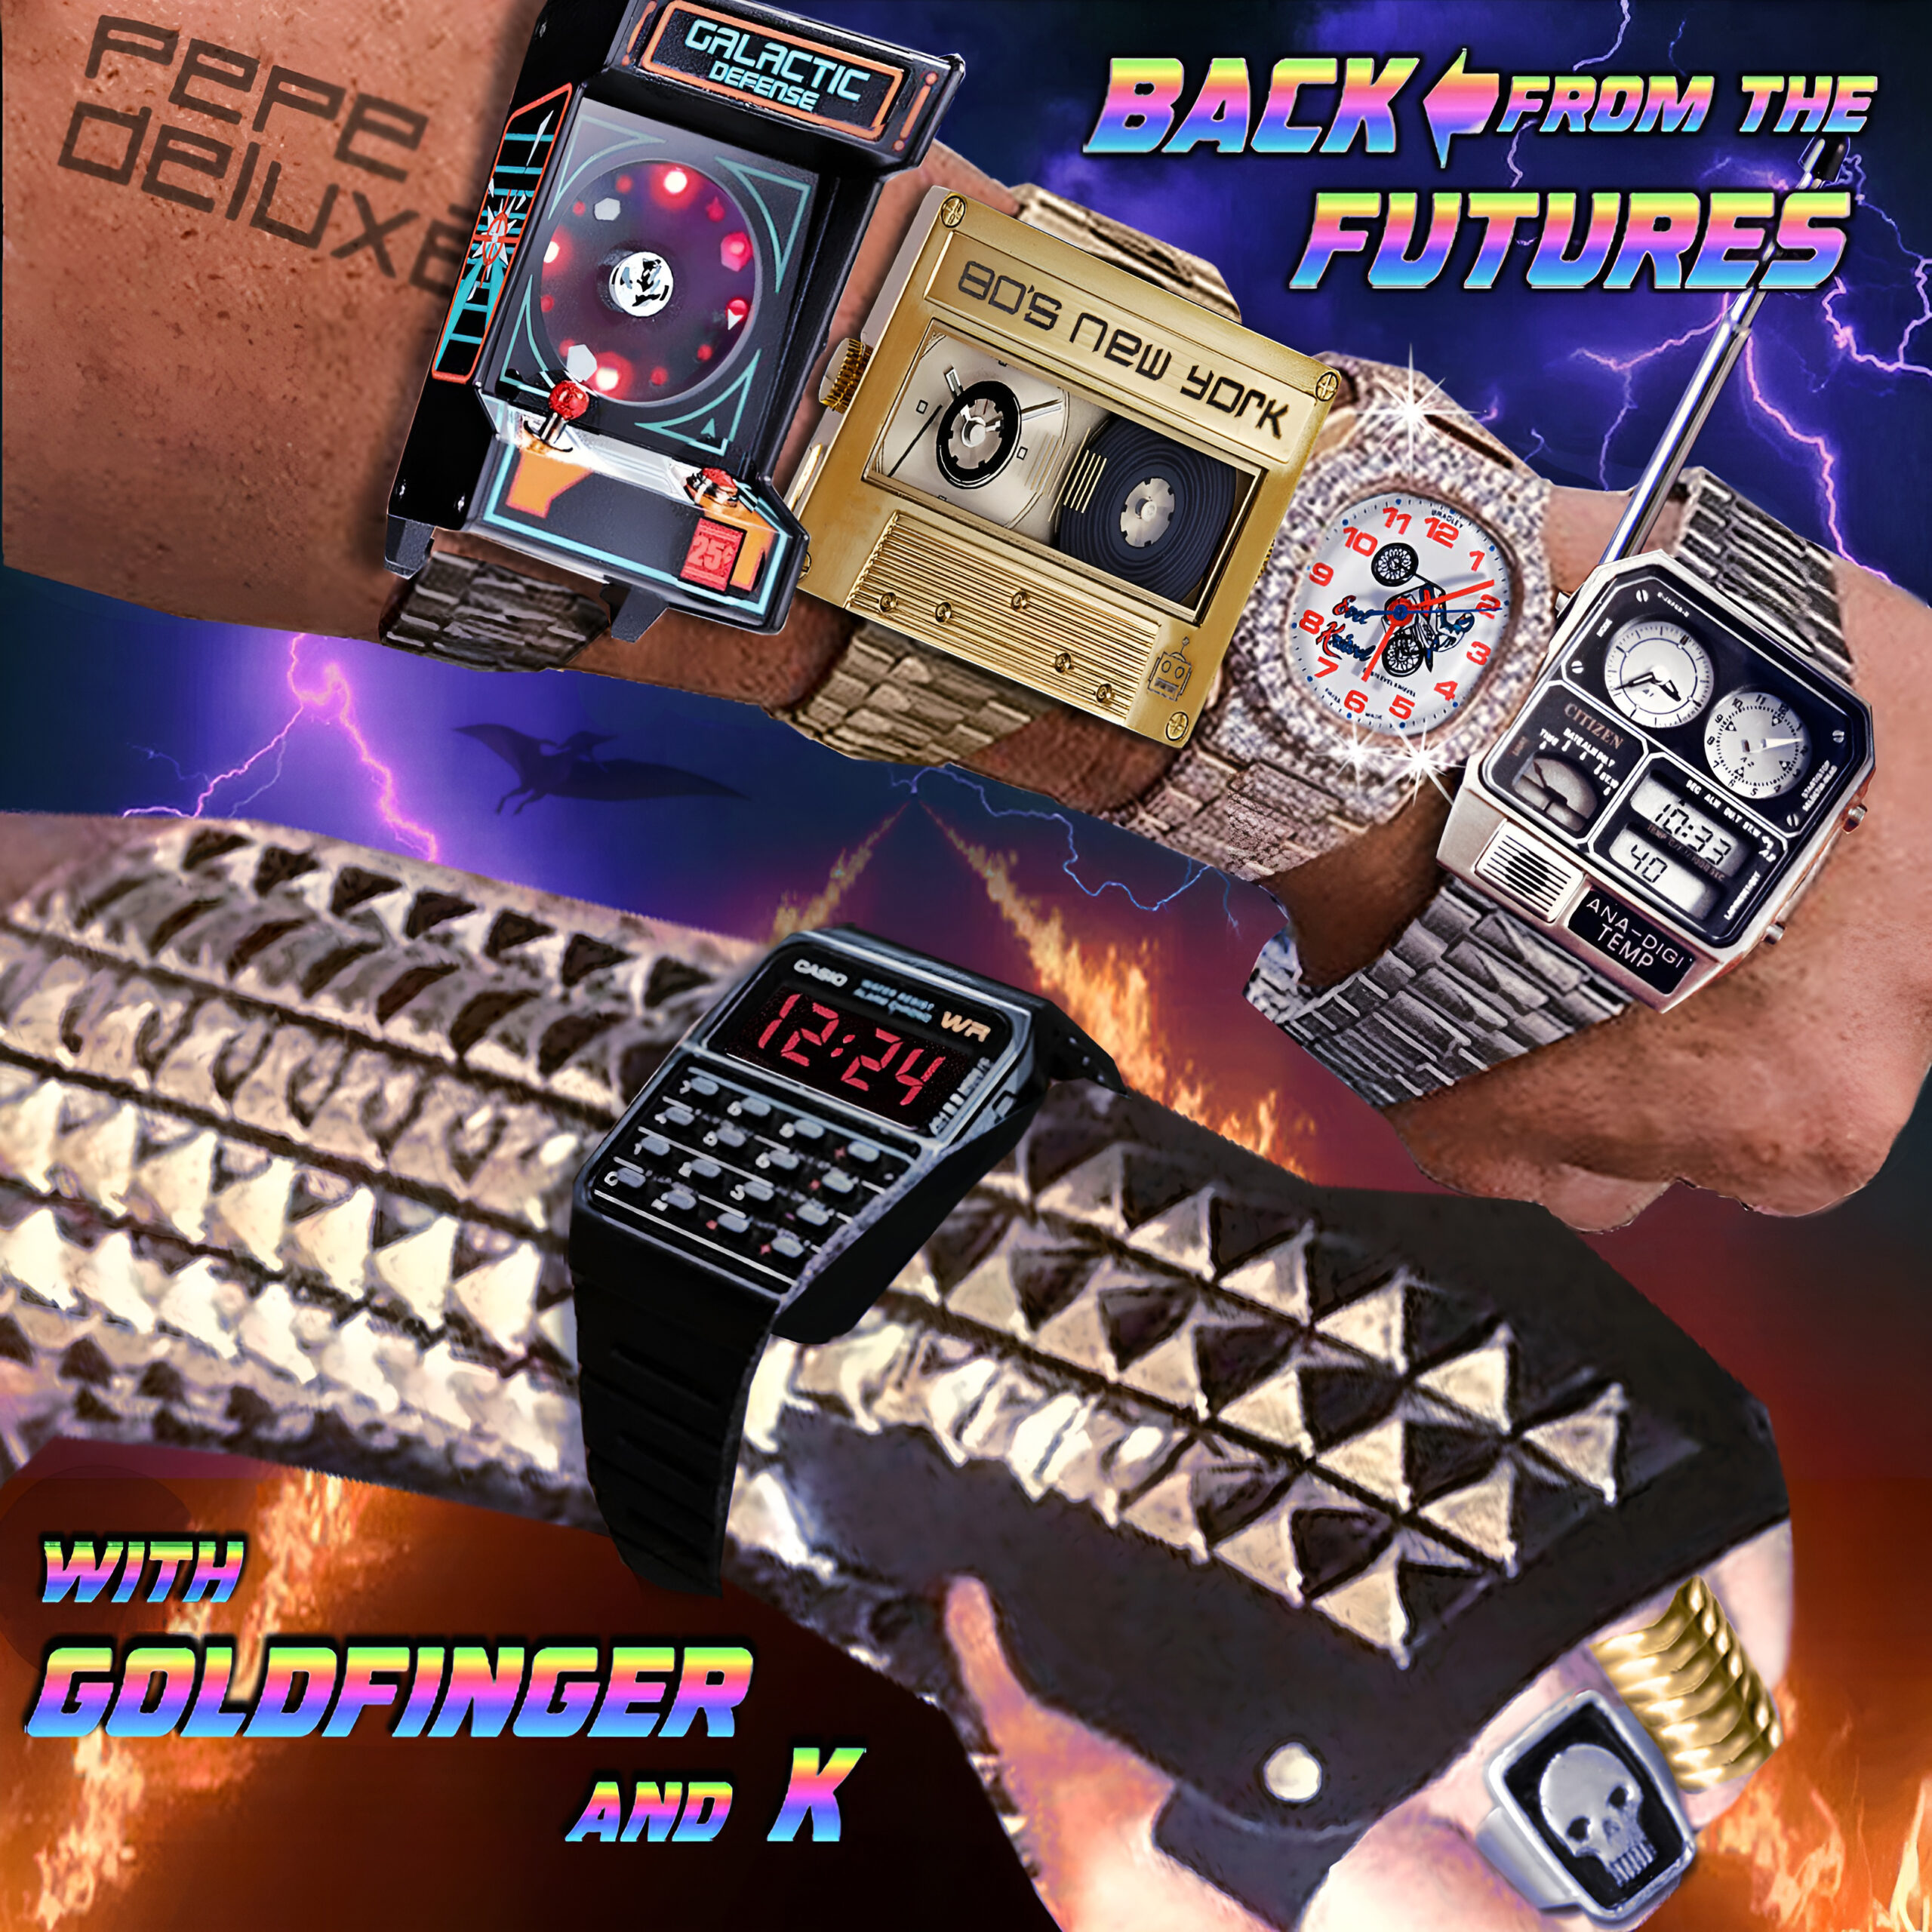 Pepe Deluxé shares new single, “Back From The Futures With Goldfinger and K”